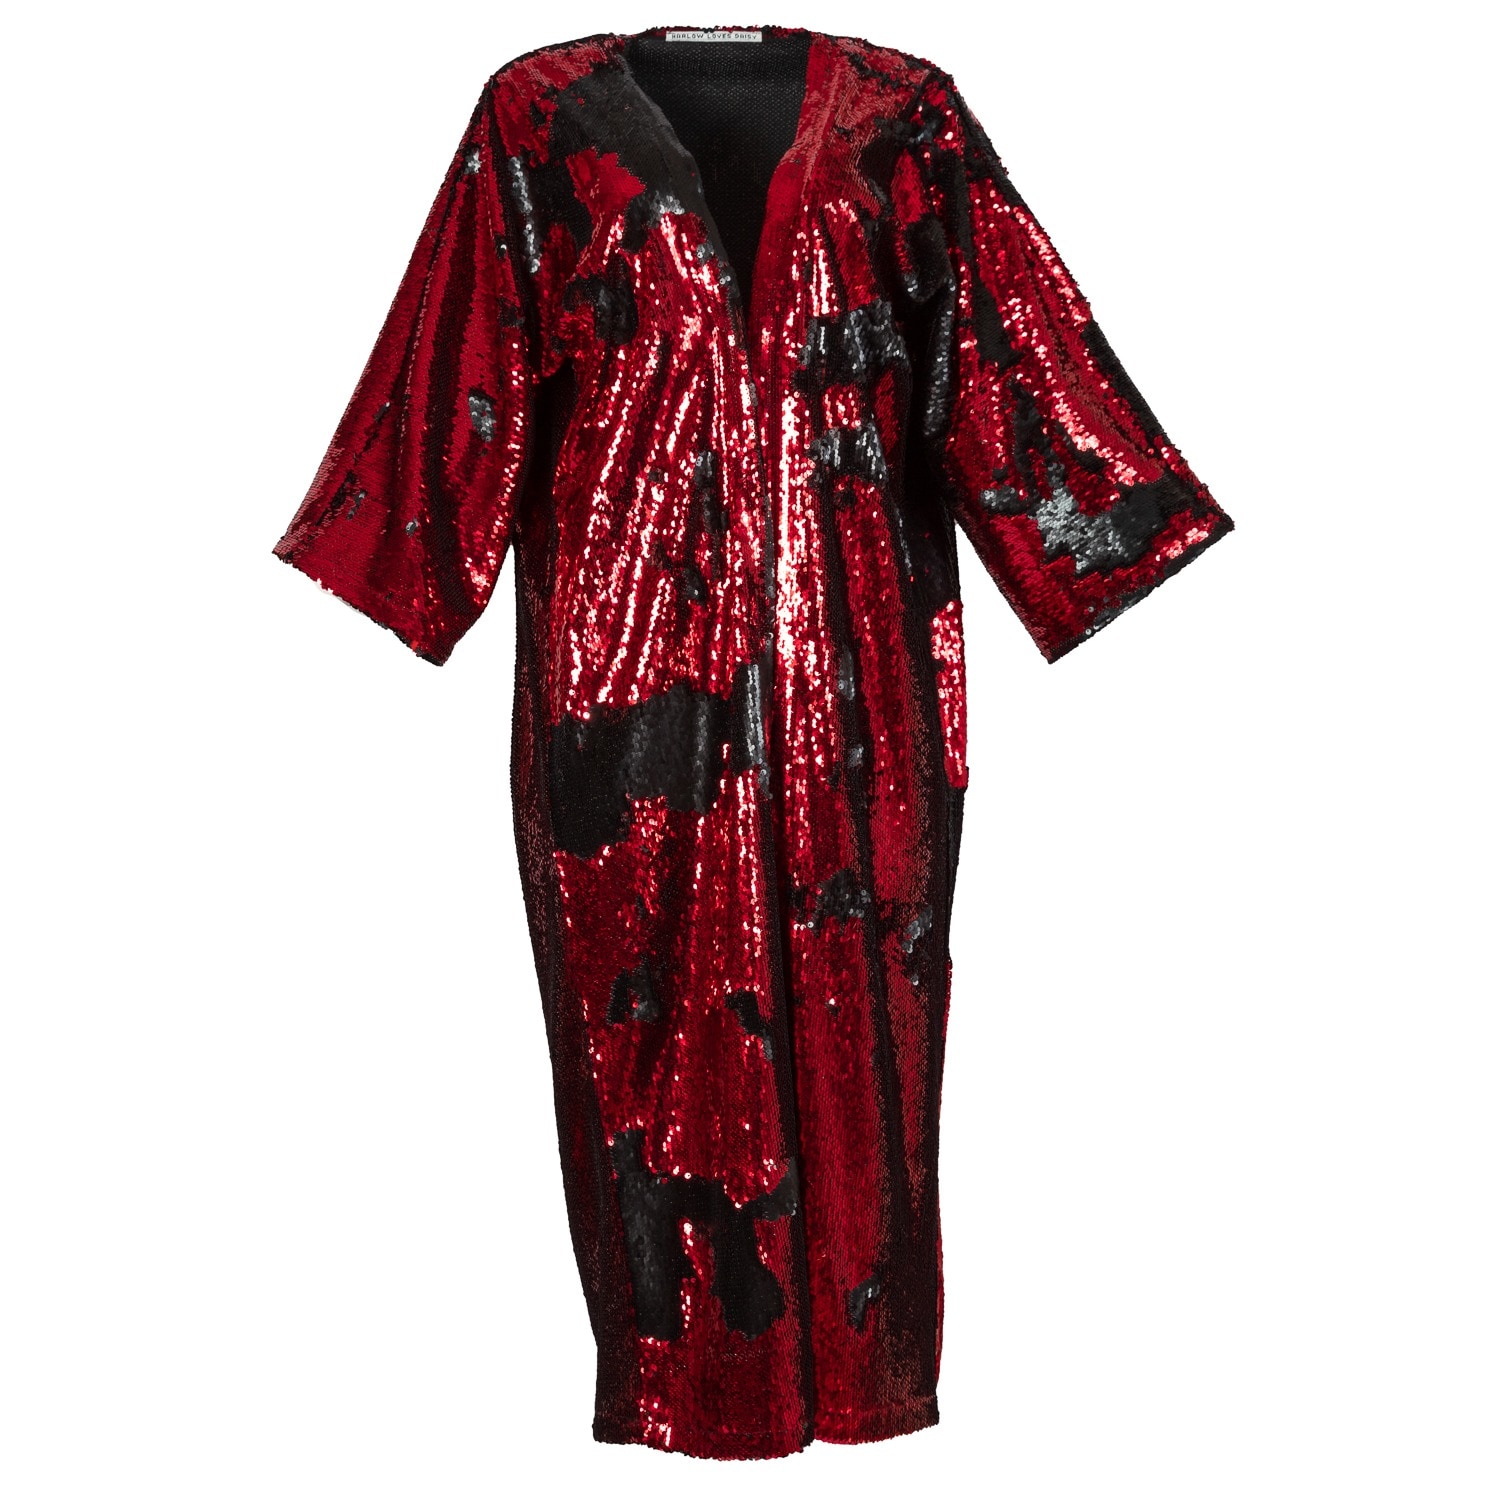 Women’s Black / Red Claude - Red, Silver & Black Italian Ombre Sequin Robe M/L Harlow Loves Daisy